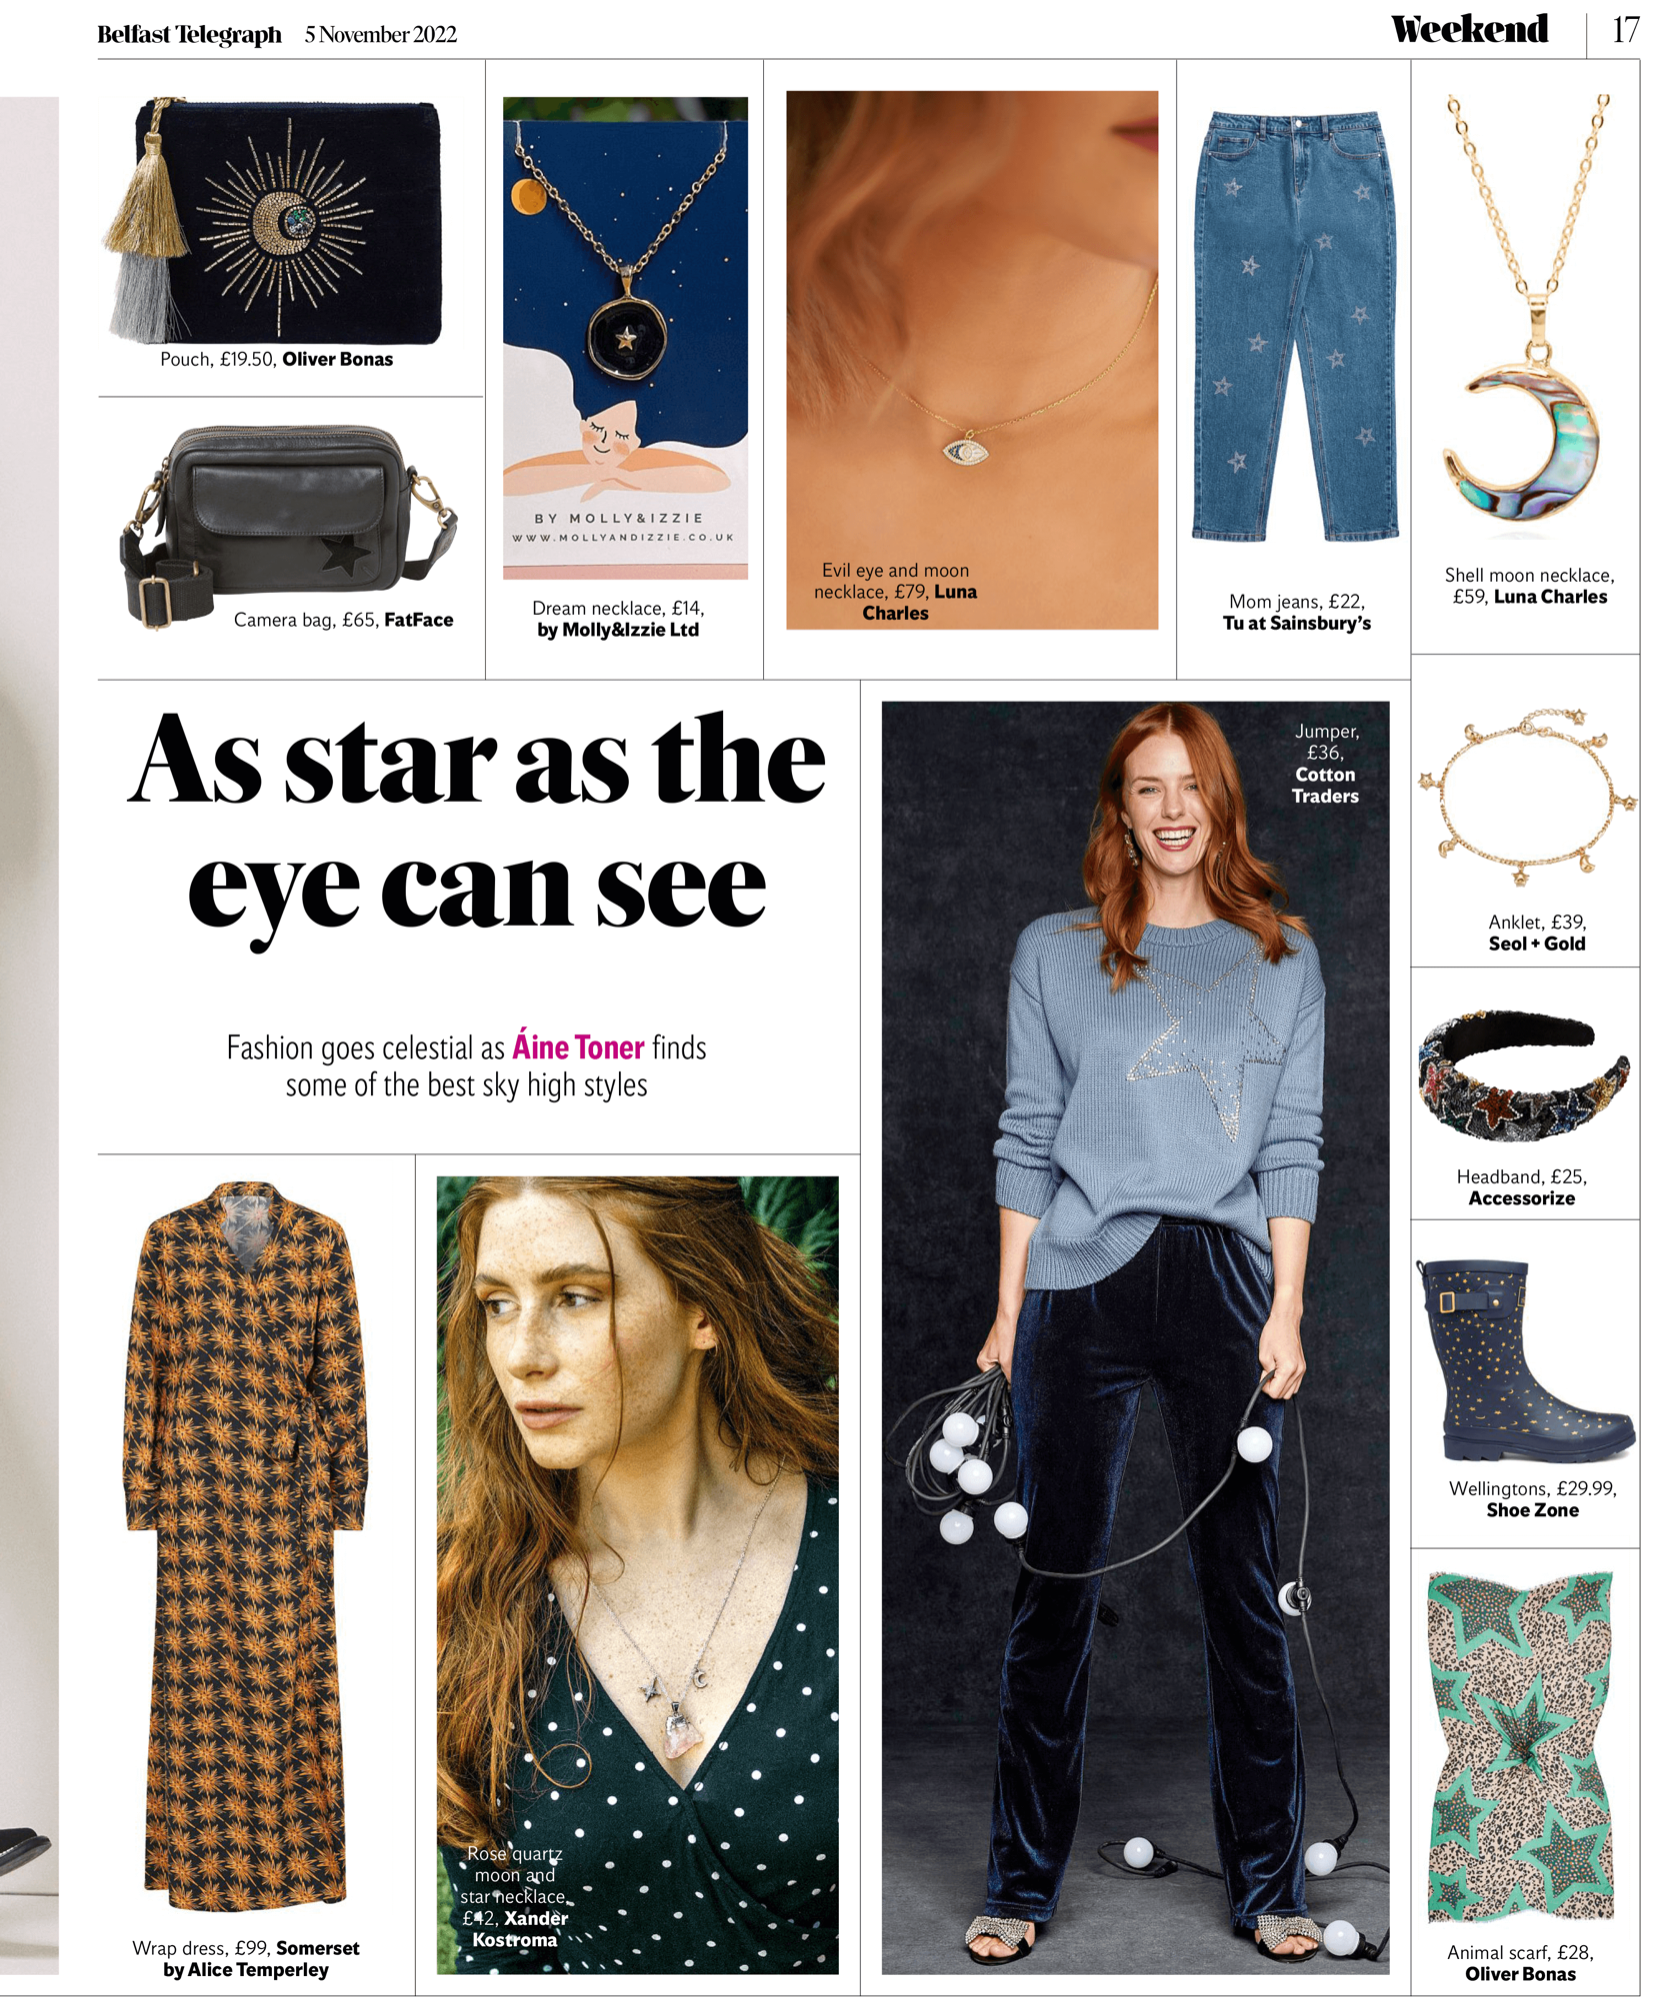 The 925 Sterling Silver Raw Cut Rose Quartz Moon & Star Necklace (Style XK188) features in the fashion edit by Aine Tonor in The Belfast Telegraph